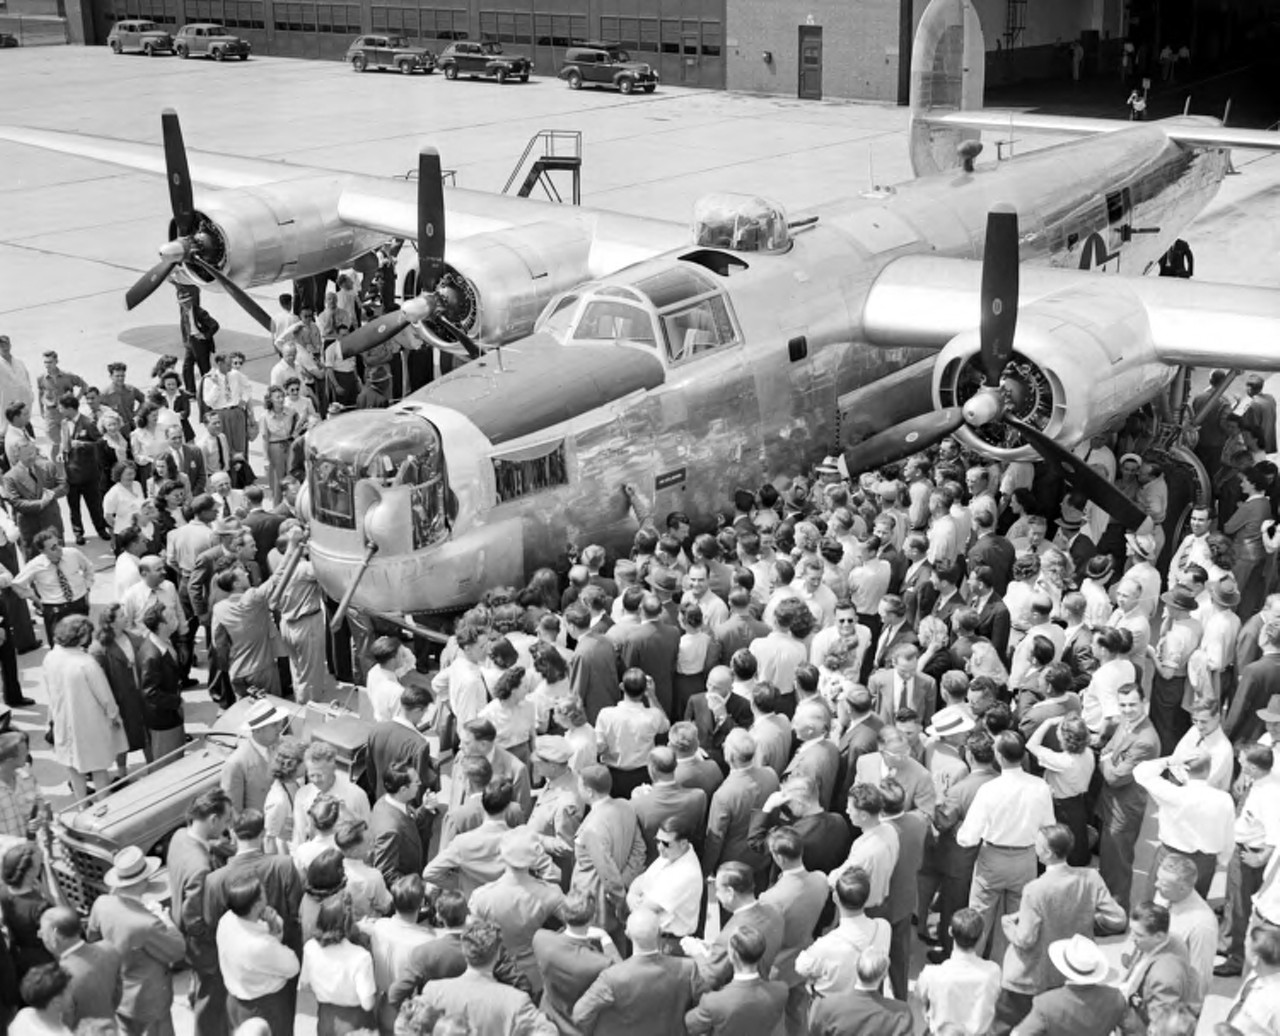 Bomber plane at the Willow Run plant
from Virtual Motor City (Photo credit: Detroit News Collection, Walter P. Reuther Library, Wayne State University)